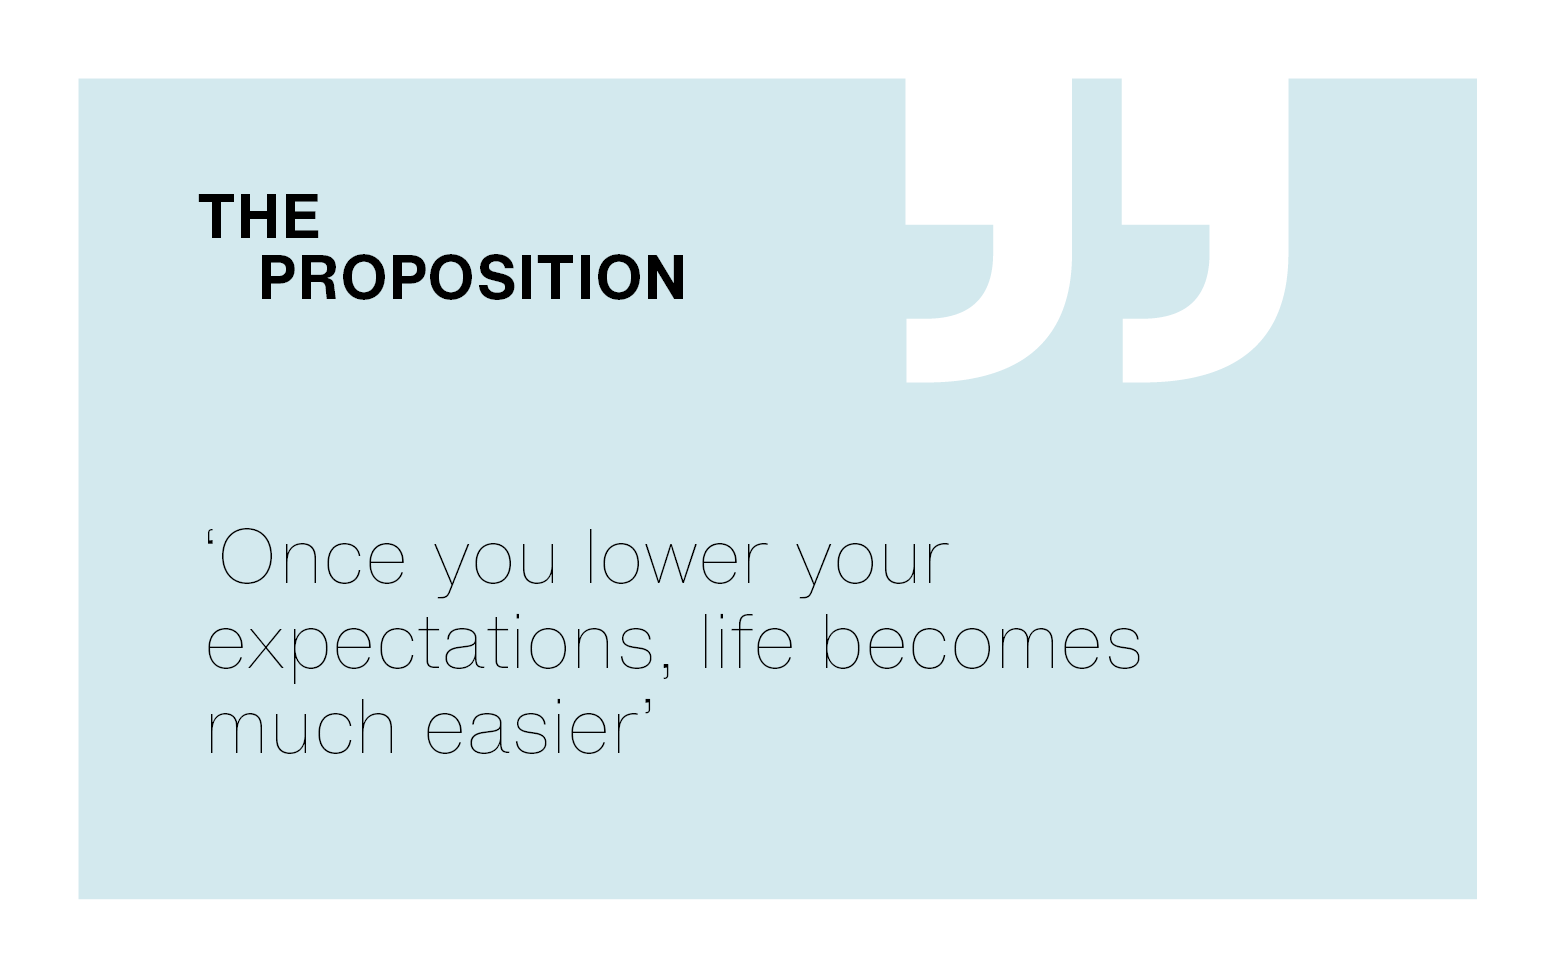 [The Proposition] ‘Once you lower your expectations, life becomes much easier’